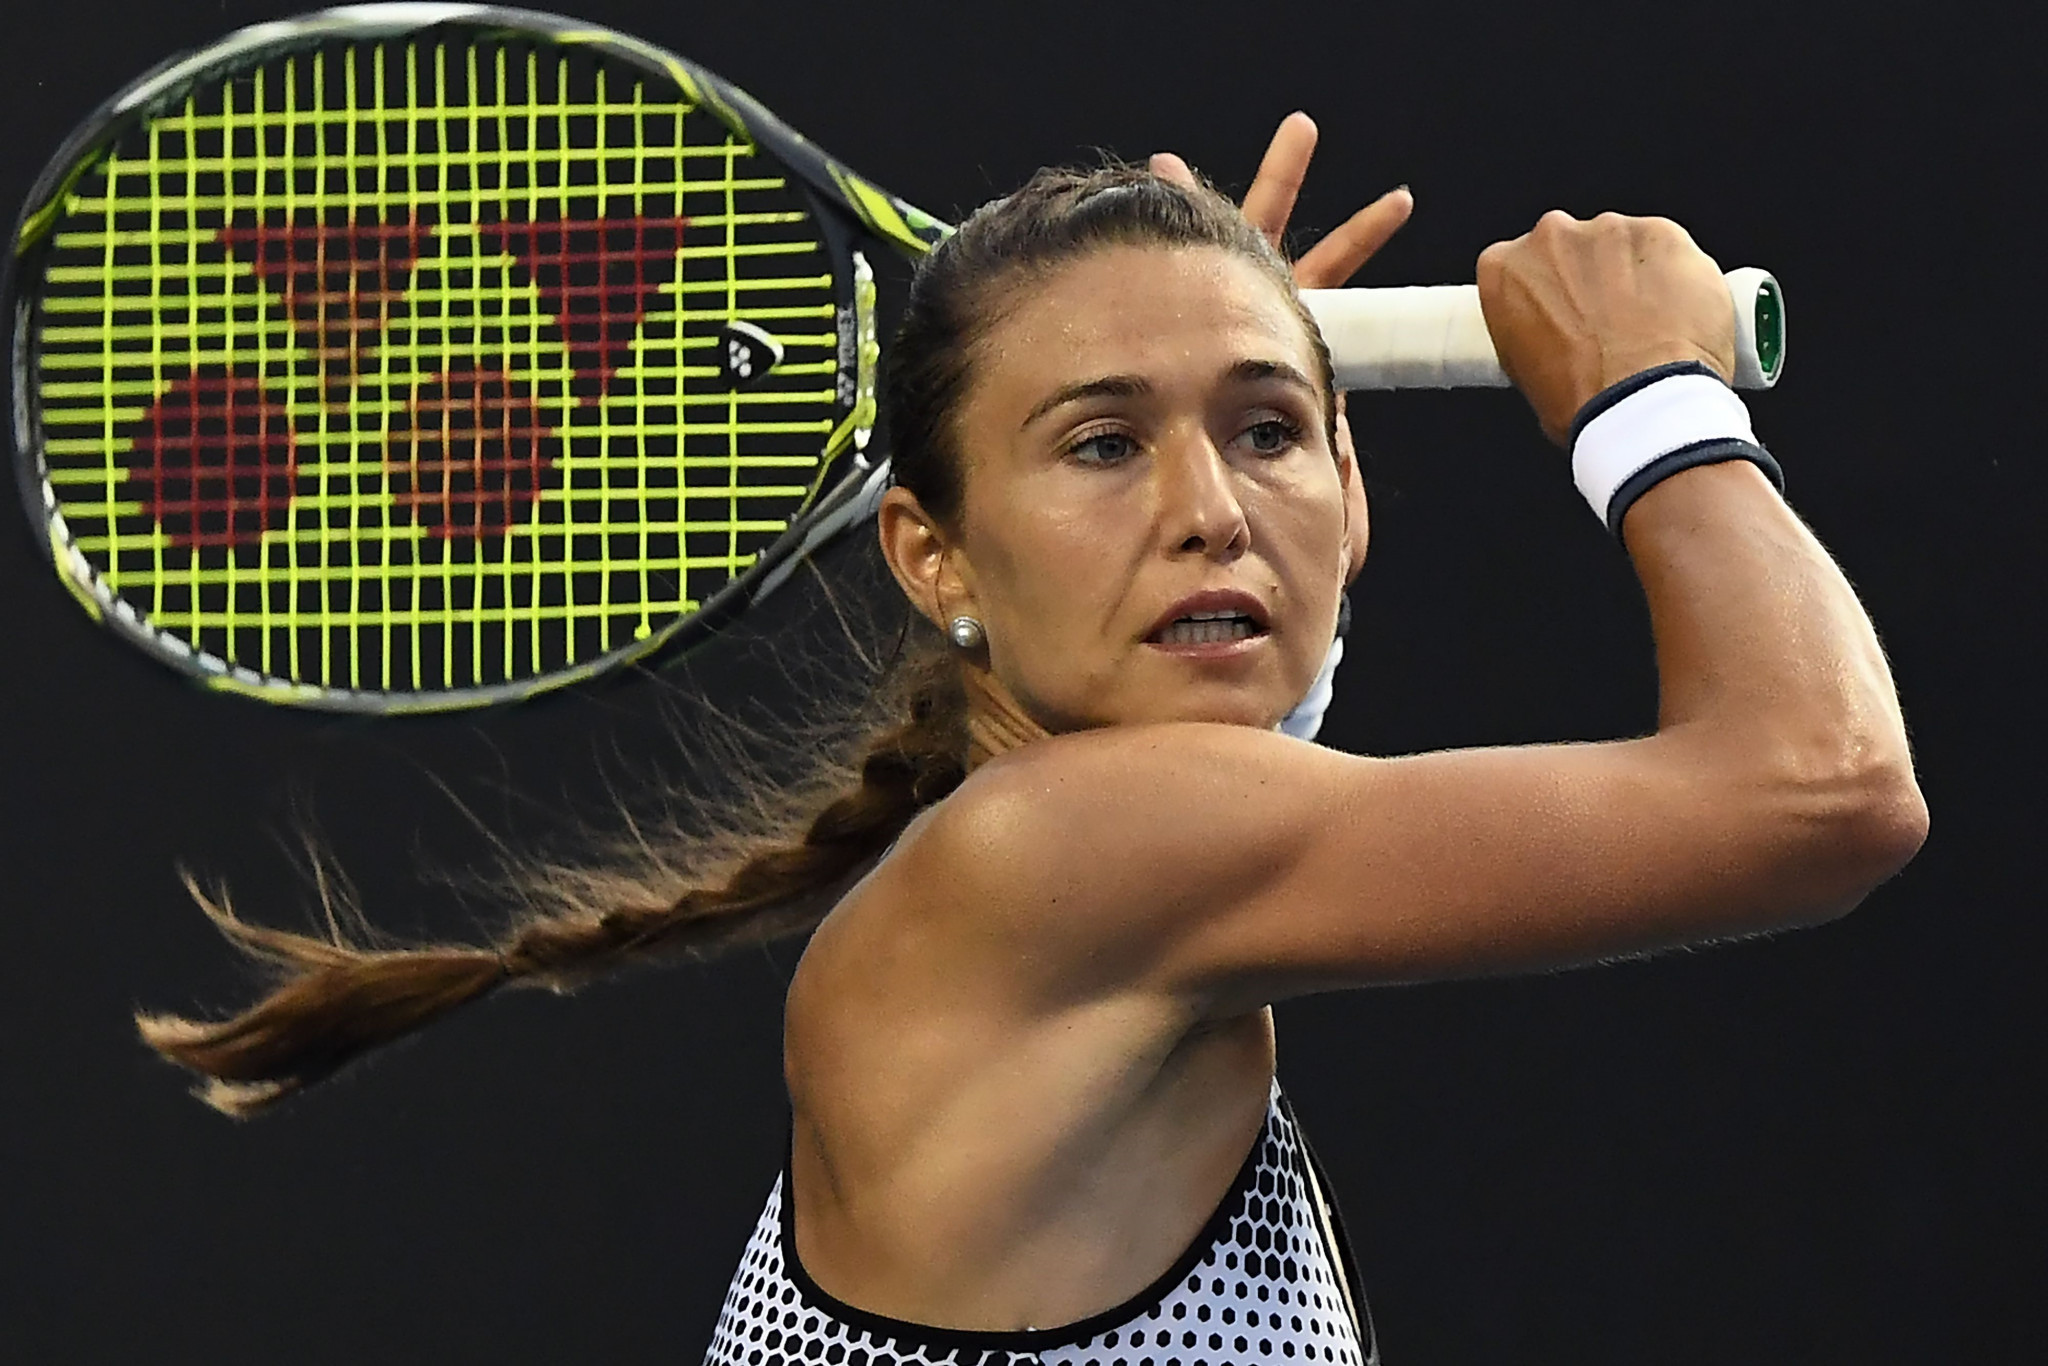 Russian tennis player Vitalia Dyachenko claims that she was treated like a "third-class person" at Cairo International Airport after LOT Polish Airlines refused to allow her on board ©Getty Images